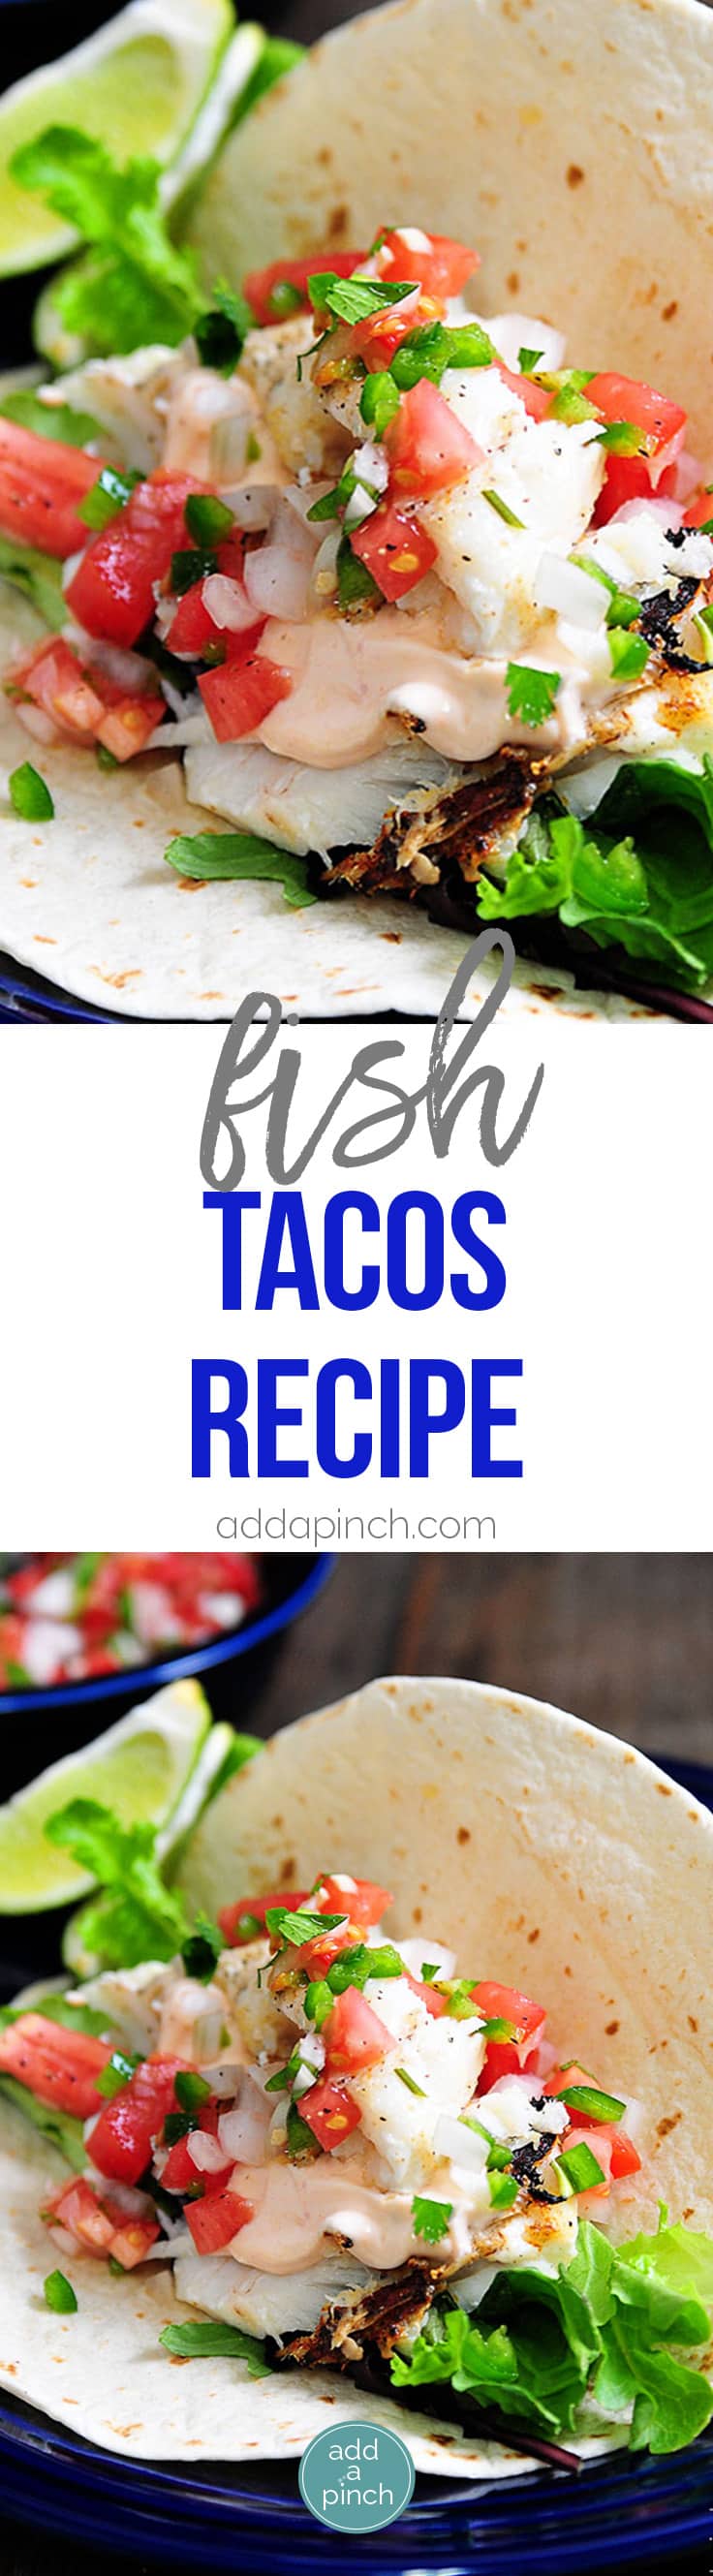 Fish Tacos Recipe - Made of flaky white fish, these fish tacos are ready in less than 30 minutes and always a favorite! // addapinch.com